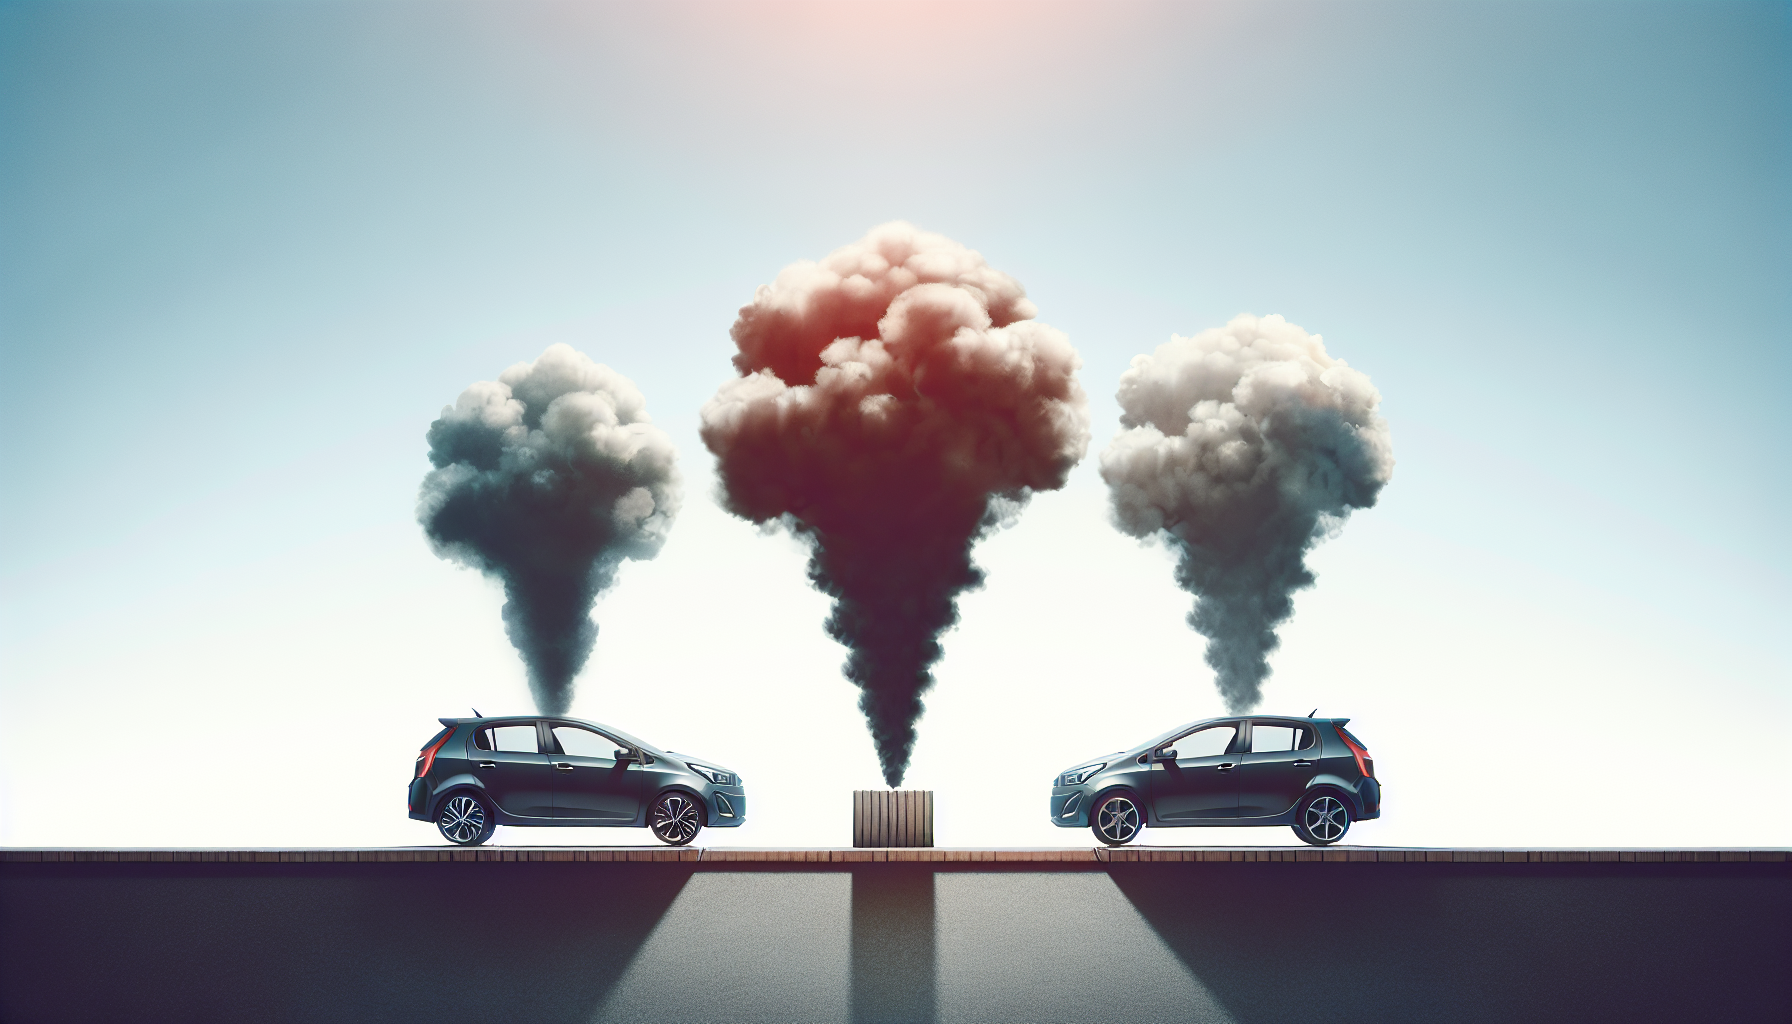 Comparison of carbon dioxide output between new and used vehicles